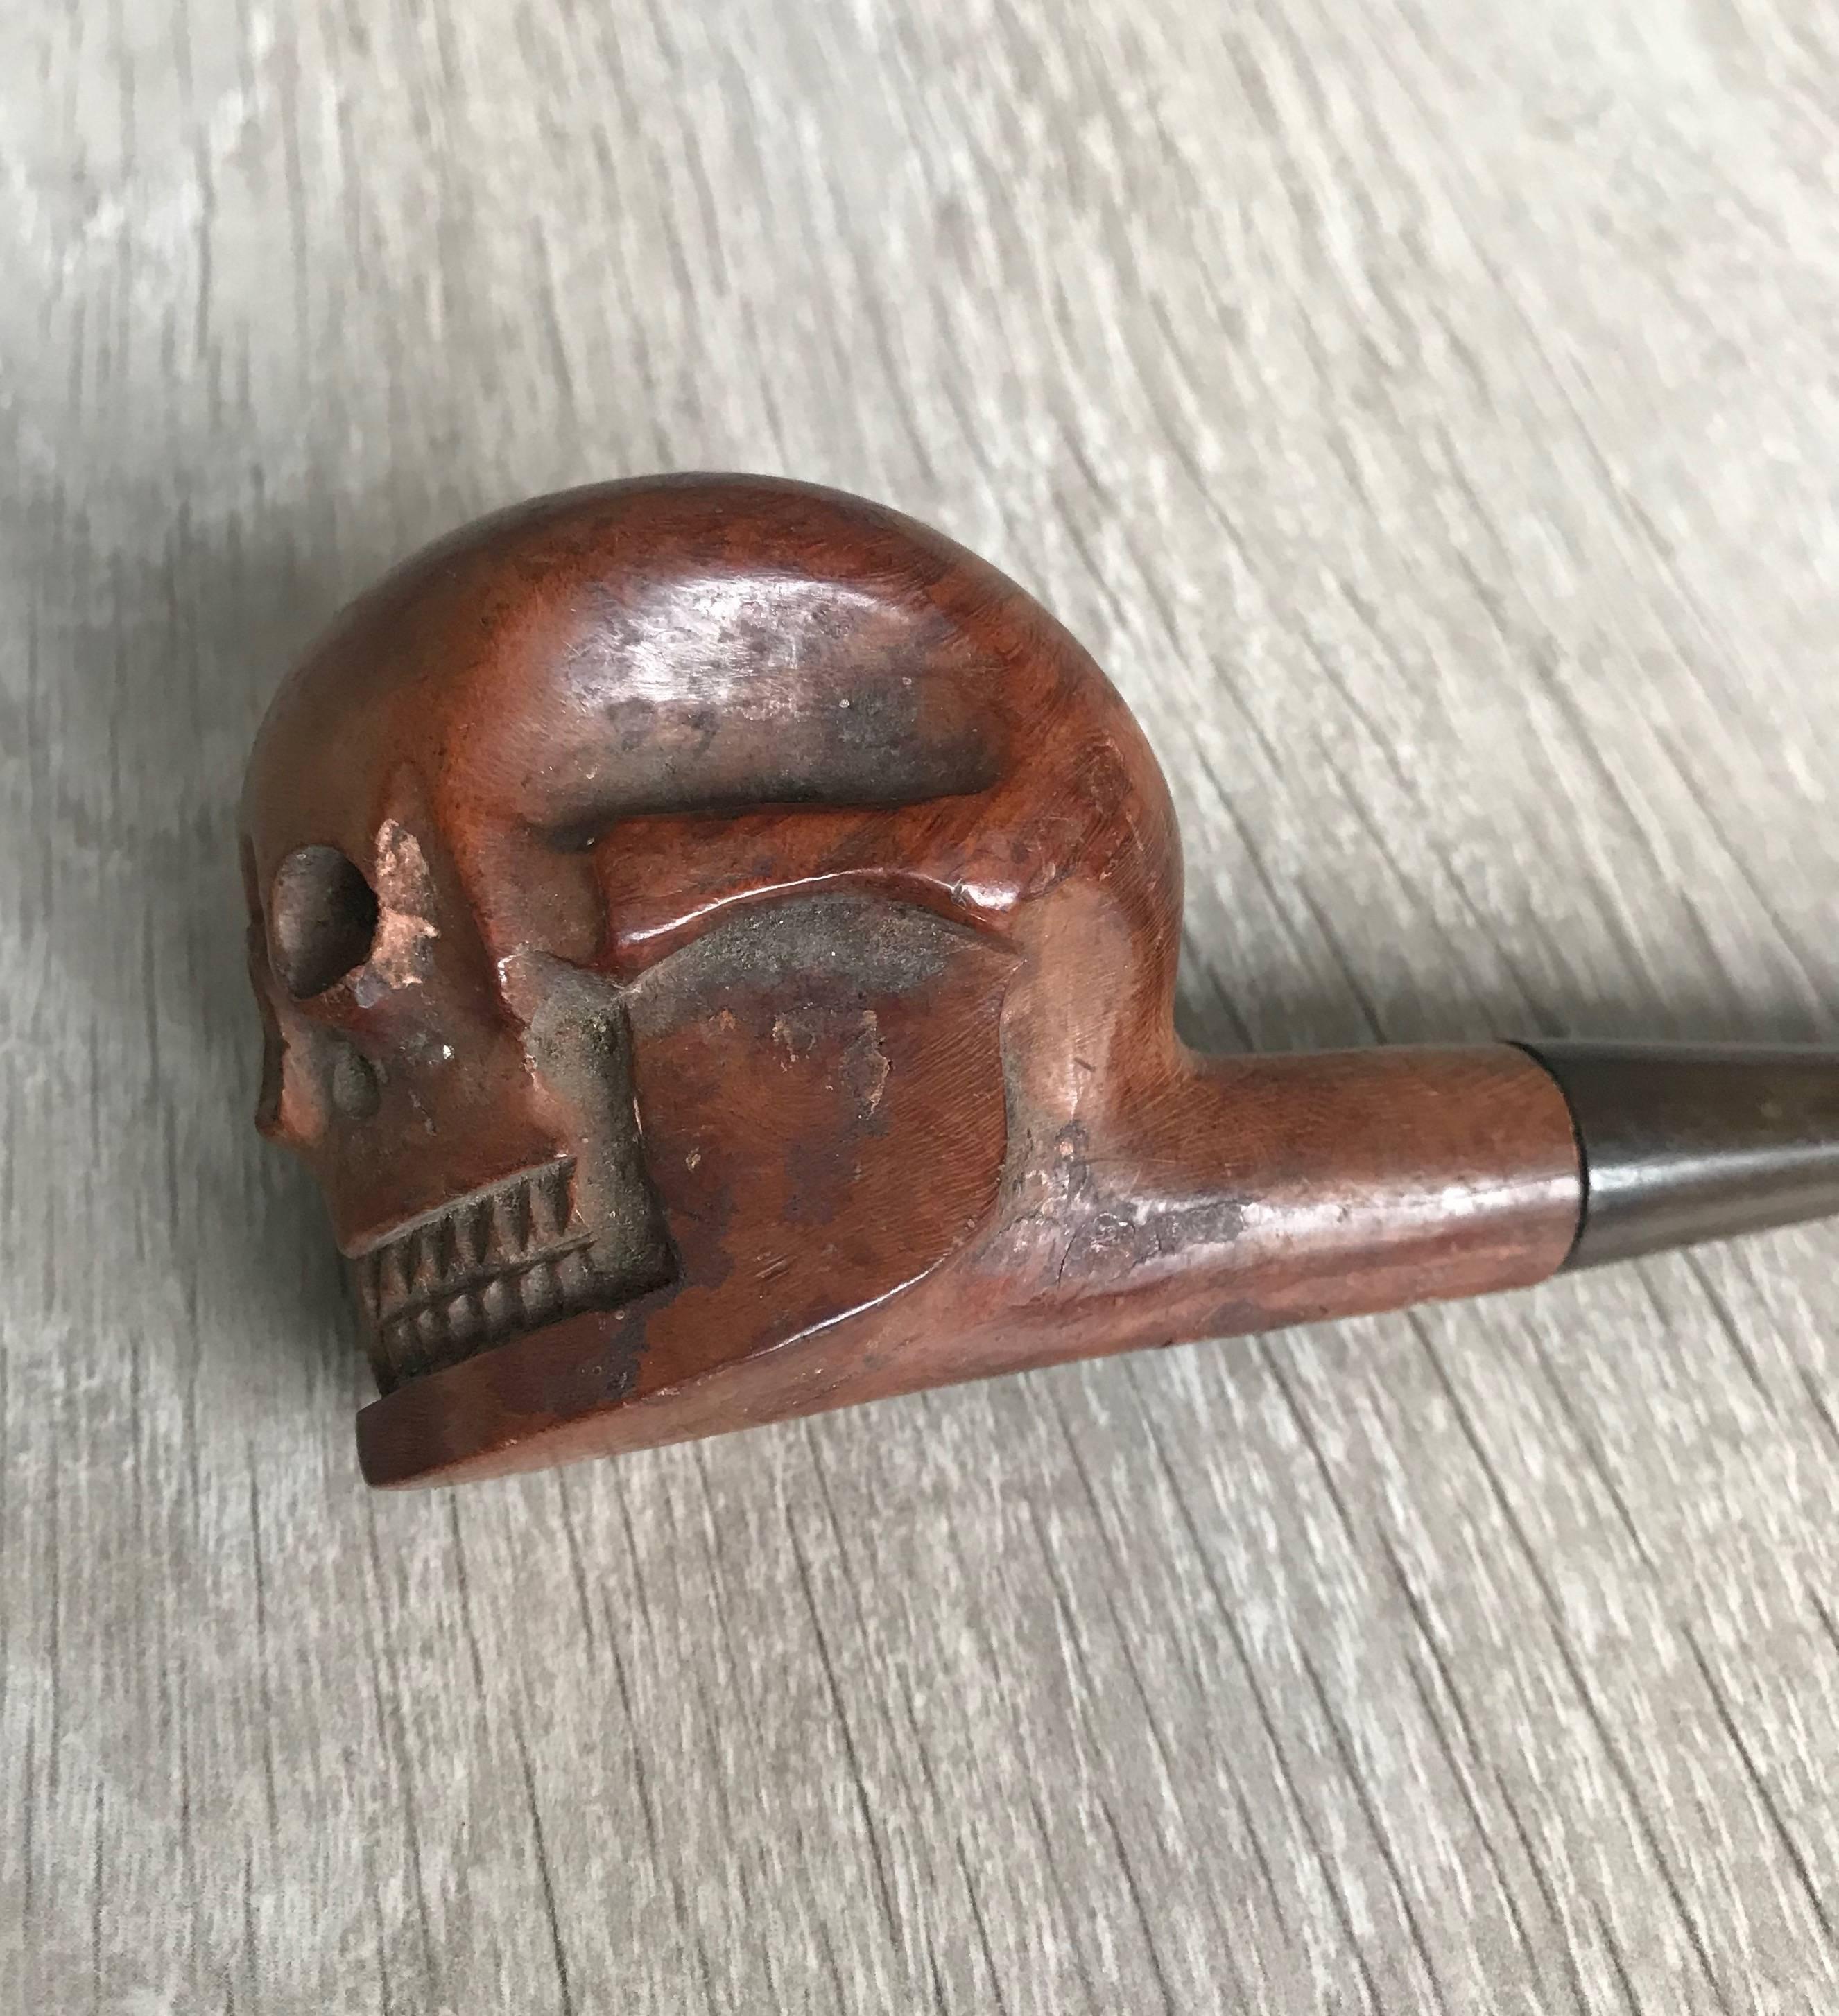 Folk Art Rare Early 20th Century Hand-Carved and Handcrafted Burl Walnut Human Skull Pipe